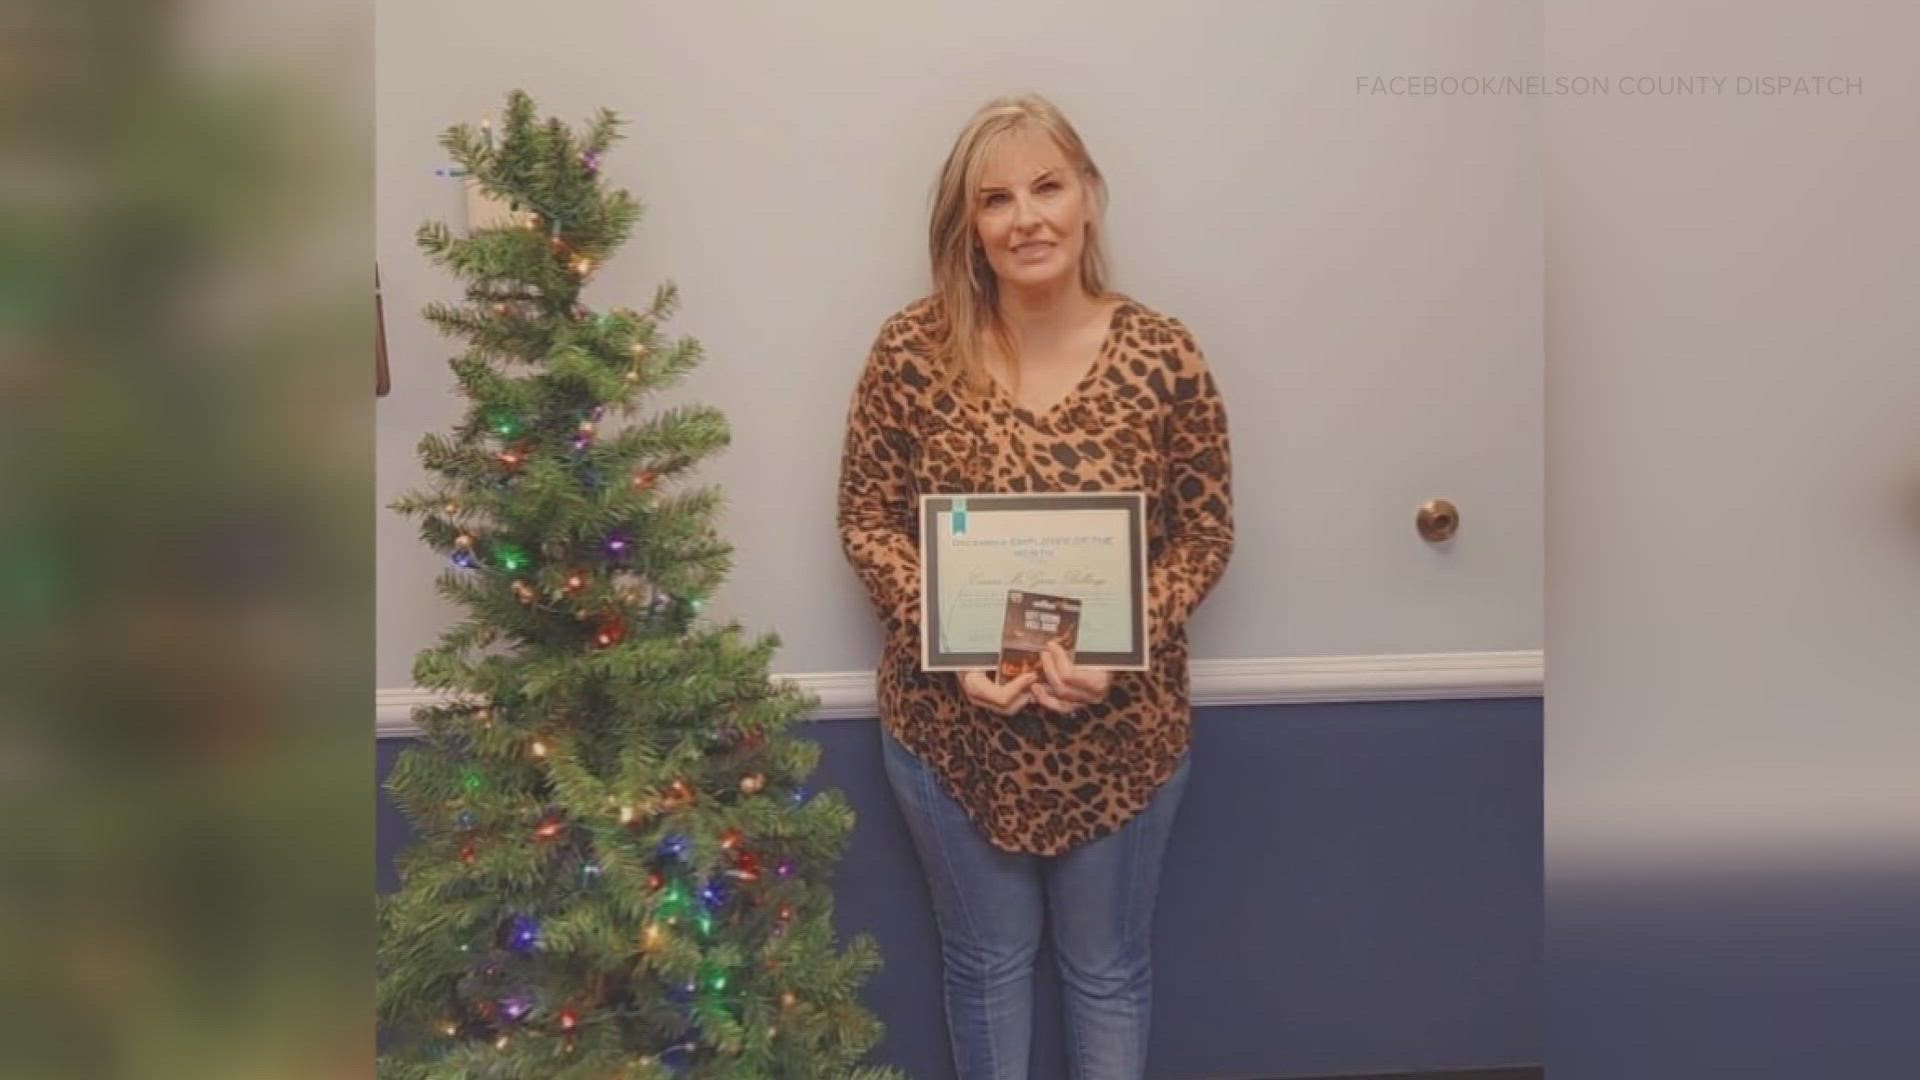 Carissa Billings was named Nelson County Dispatch employee of the month in December after helping Alistair Leger put out a fire.